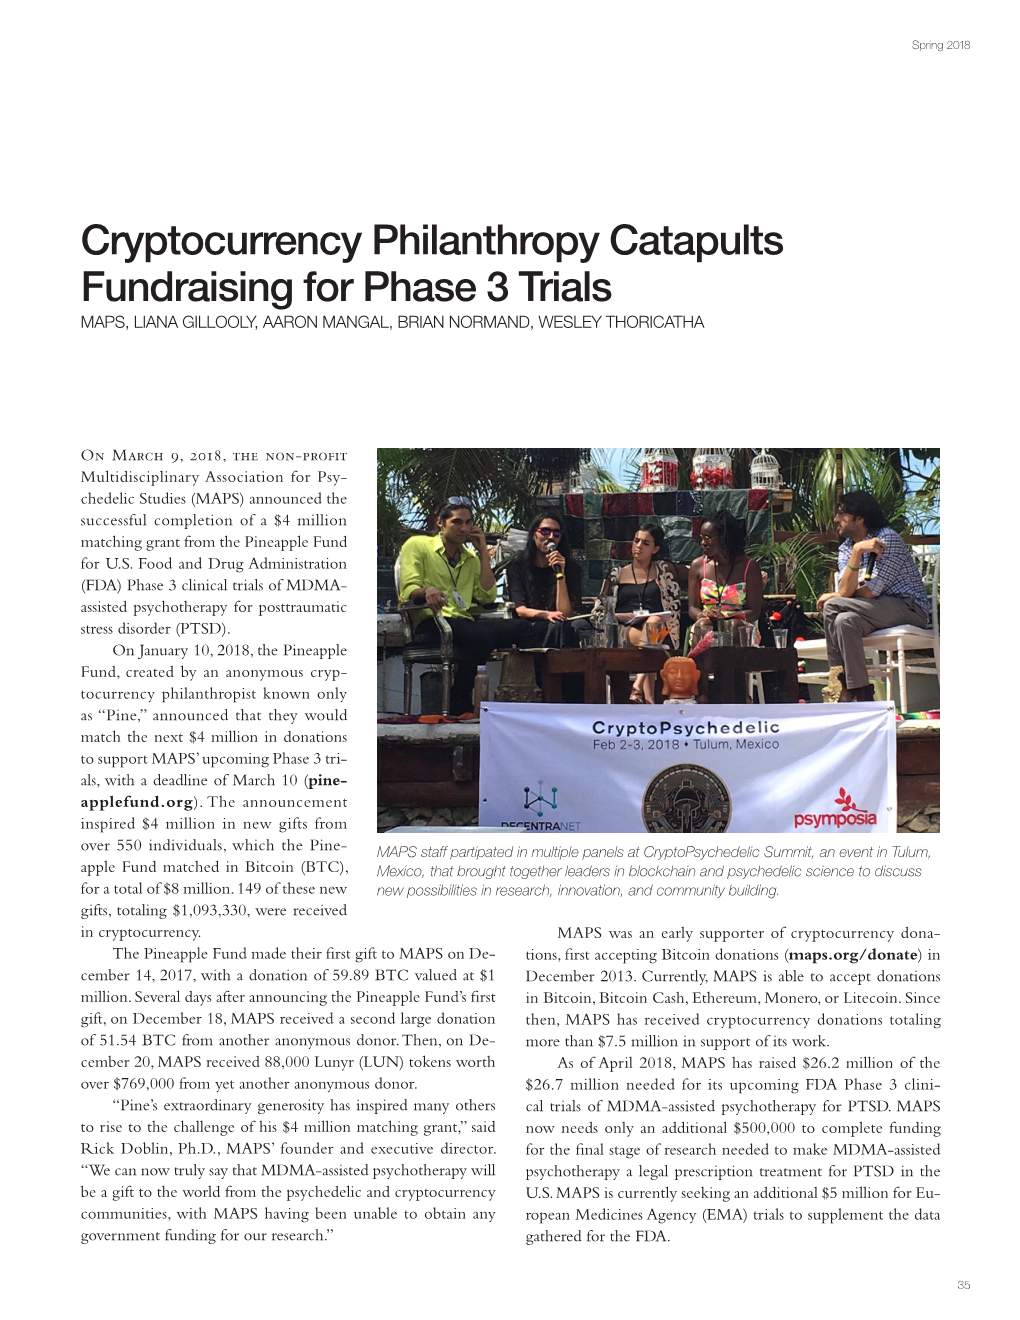 Cryptocurrency Philanthropy Catapults Fundraising for Phase 3 Trials MAPS, LIANA GILLOOLY, AARON MANGAL, BRIAN NORMAND, WESLEY THORICATHA